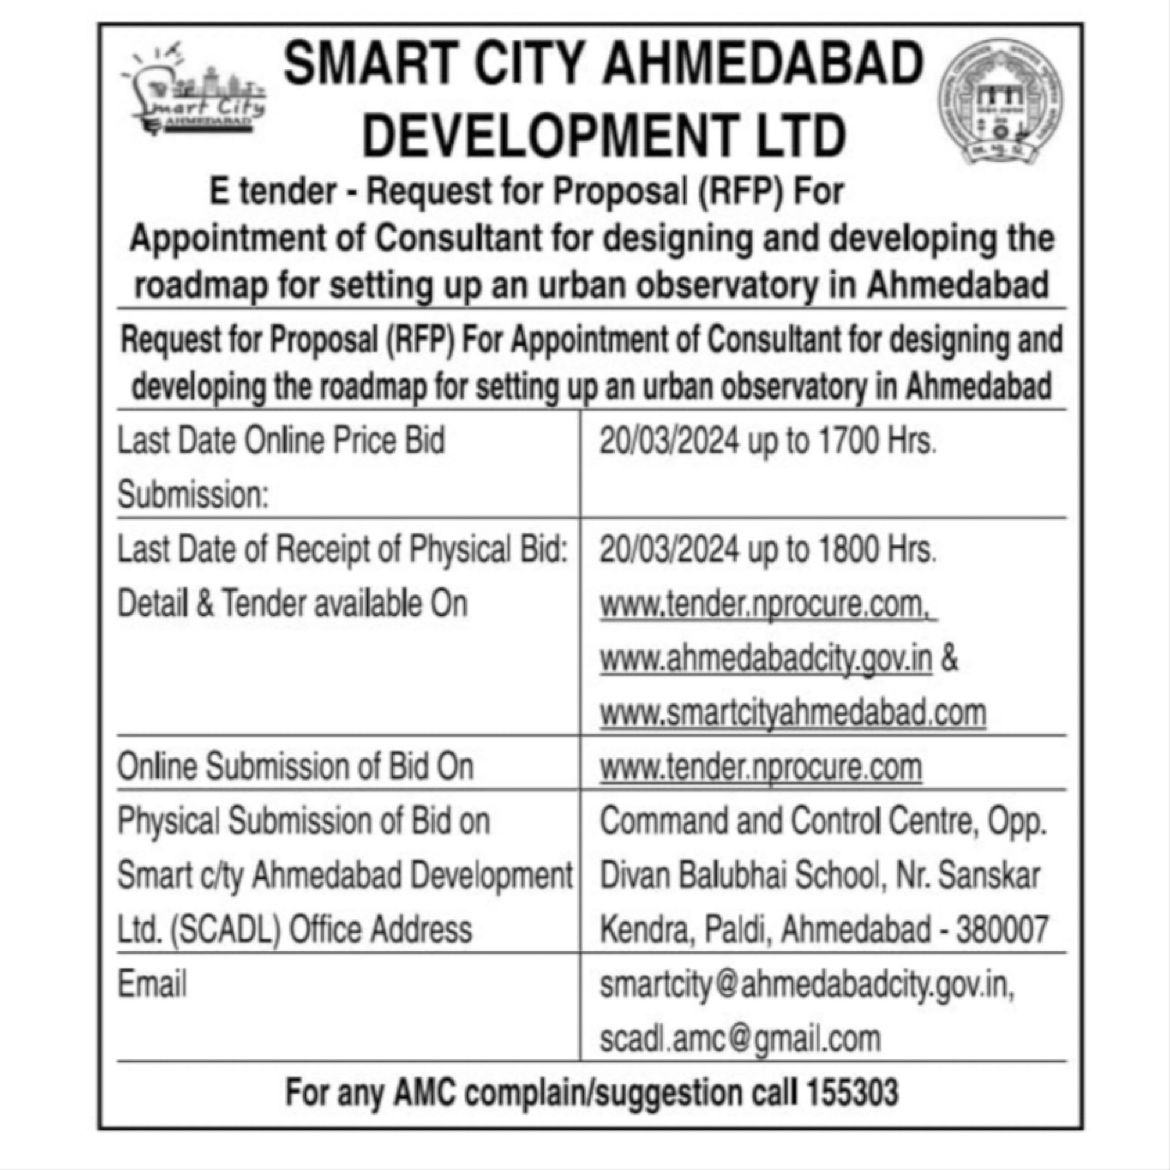 Smart City Ahmedabad Development Limited invites proposals for consultants to design and develop an urban observatory in Ahmedabad.

#amc #amcforpeople #smartcityahmedabad #urbanobservatory #ahmedabad #municipalcorporation